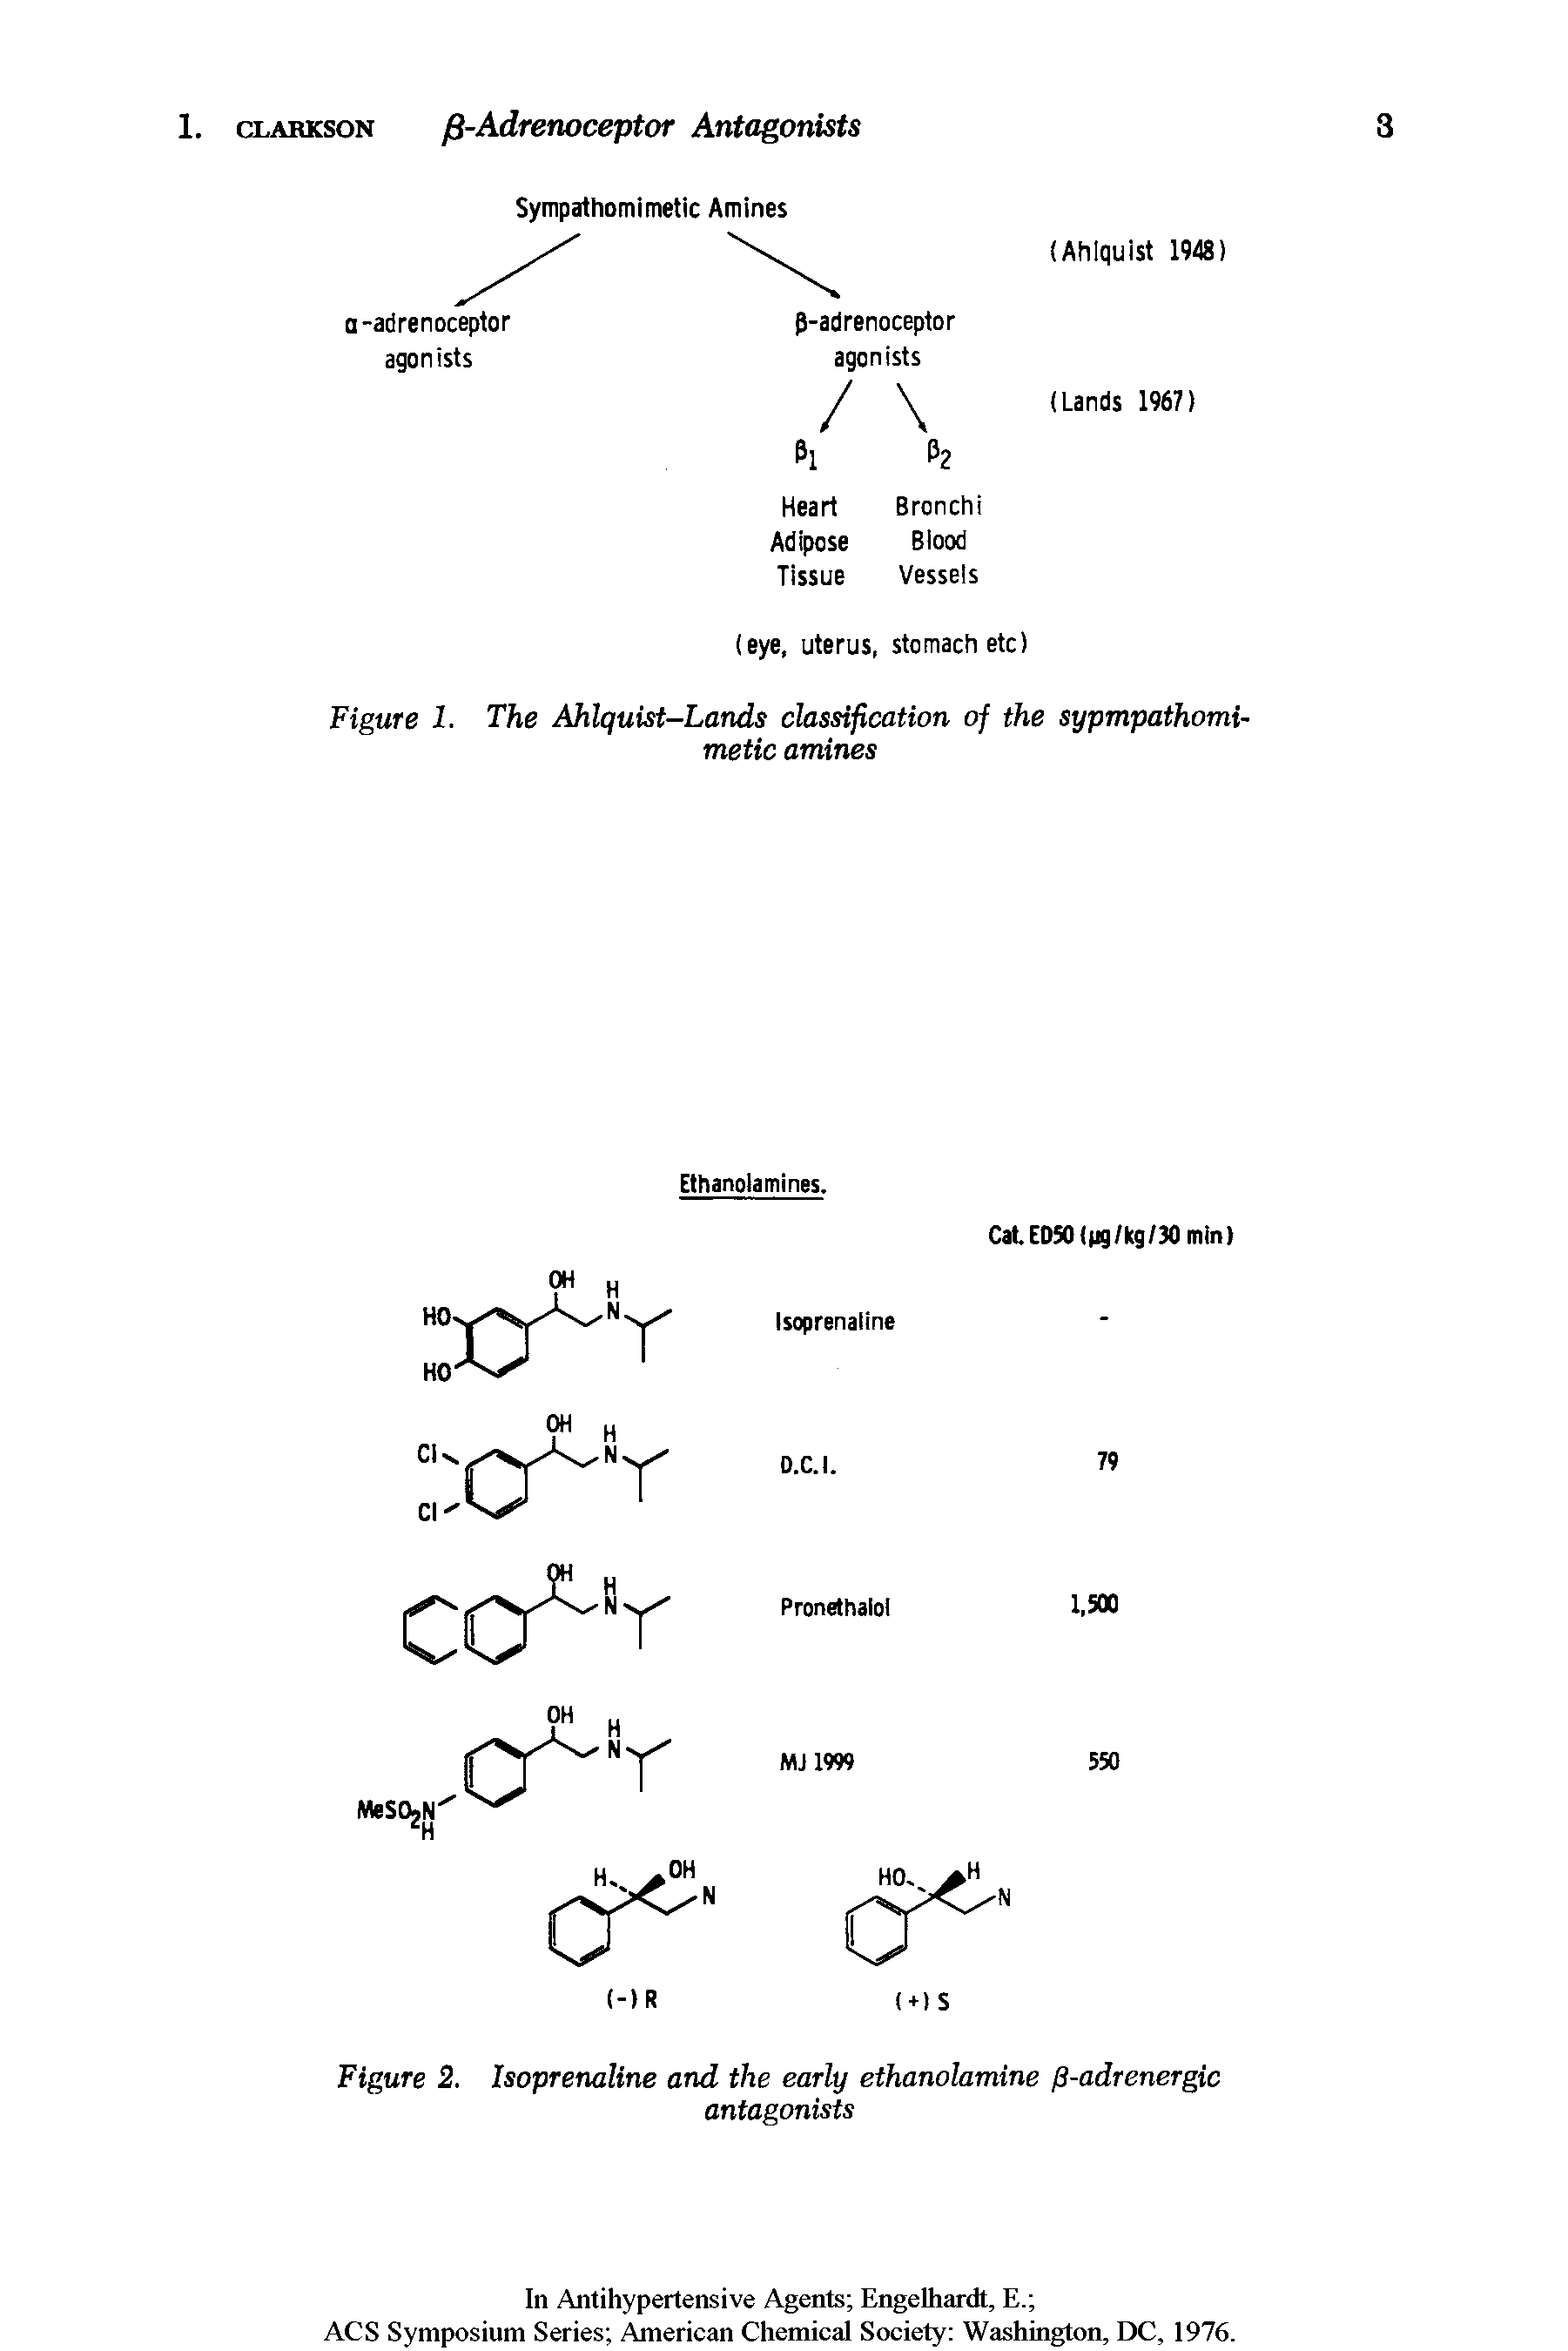 Figure 1. The Ahlquist-Lands classification of the sypmpathomi-metic amines...